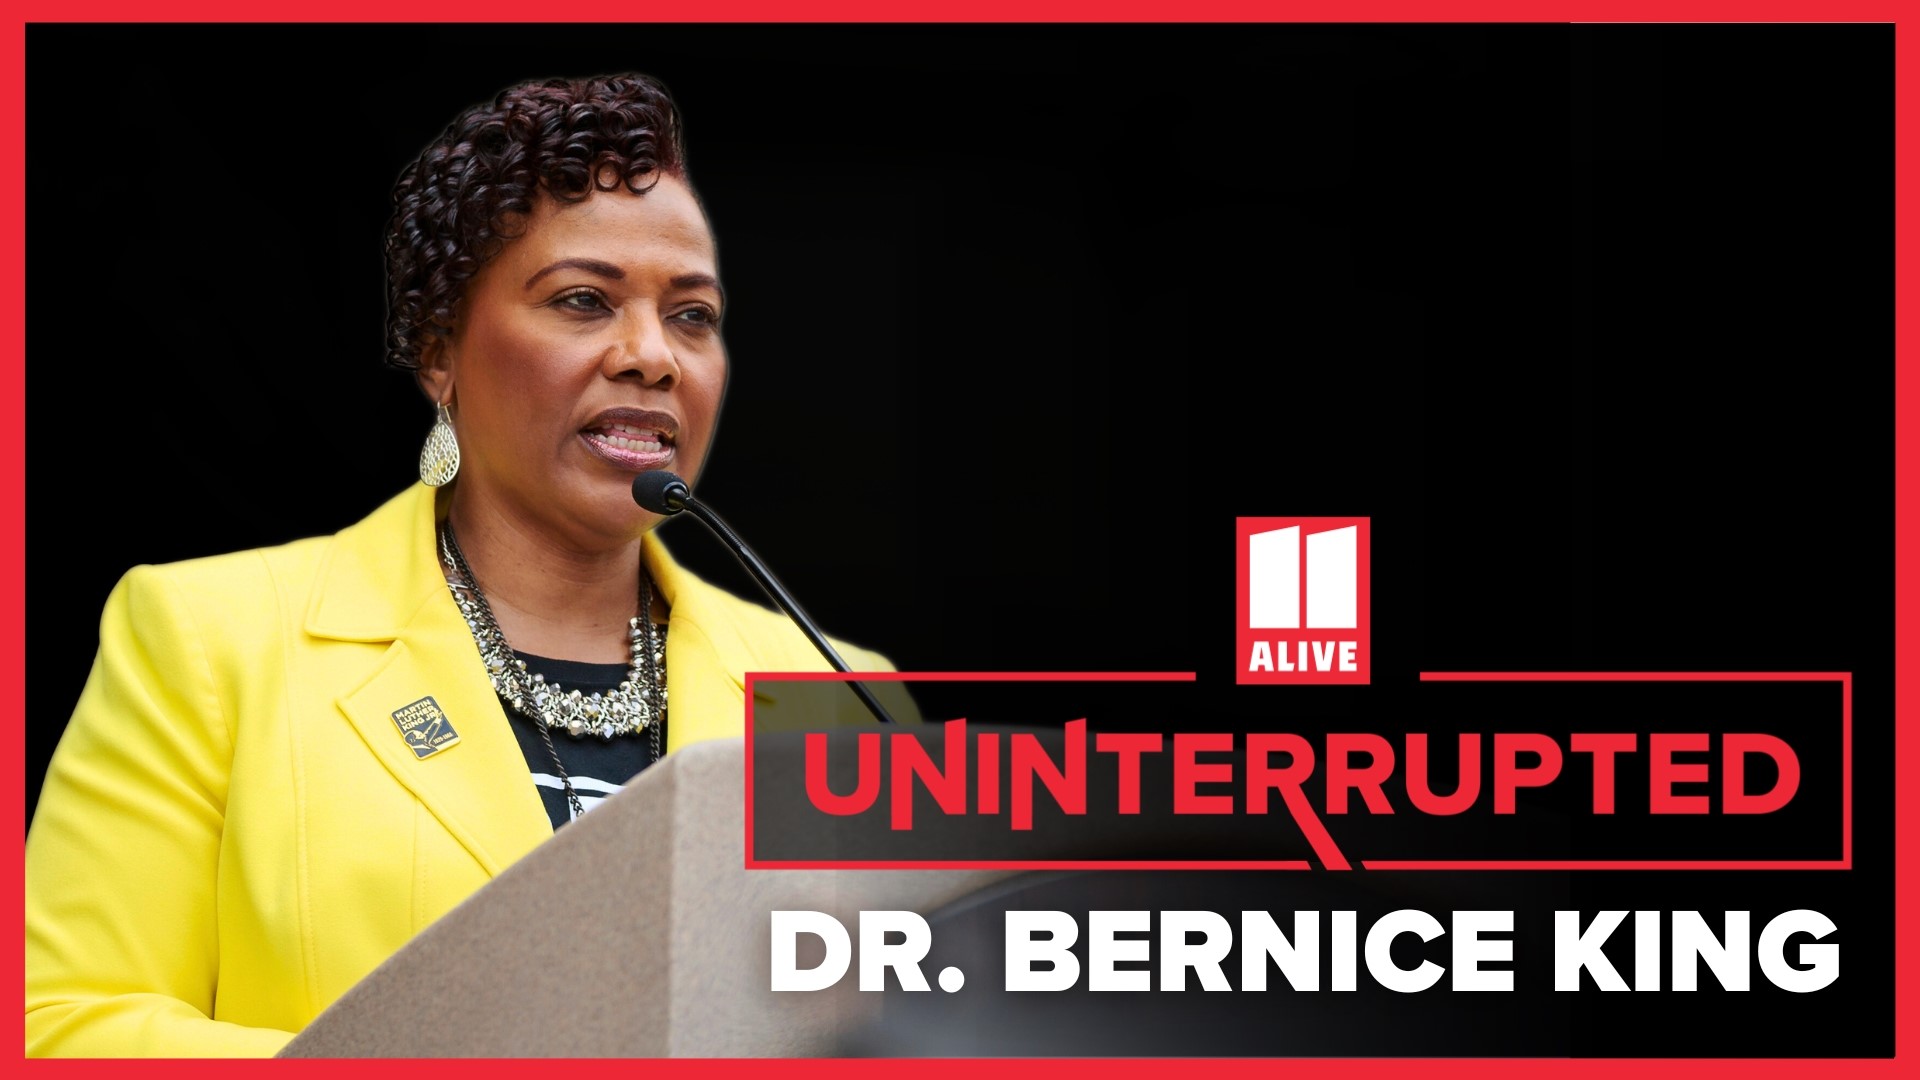 As the world honors Dr. Martin Luther King Jr., 11Alive's Neima Abdulahi sits down with his daughter, Dr. Bernice King, to discuss how her father's legacy lives on.